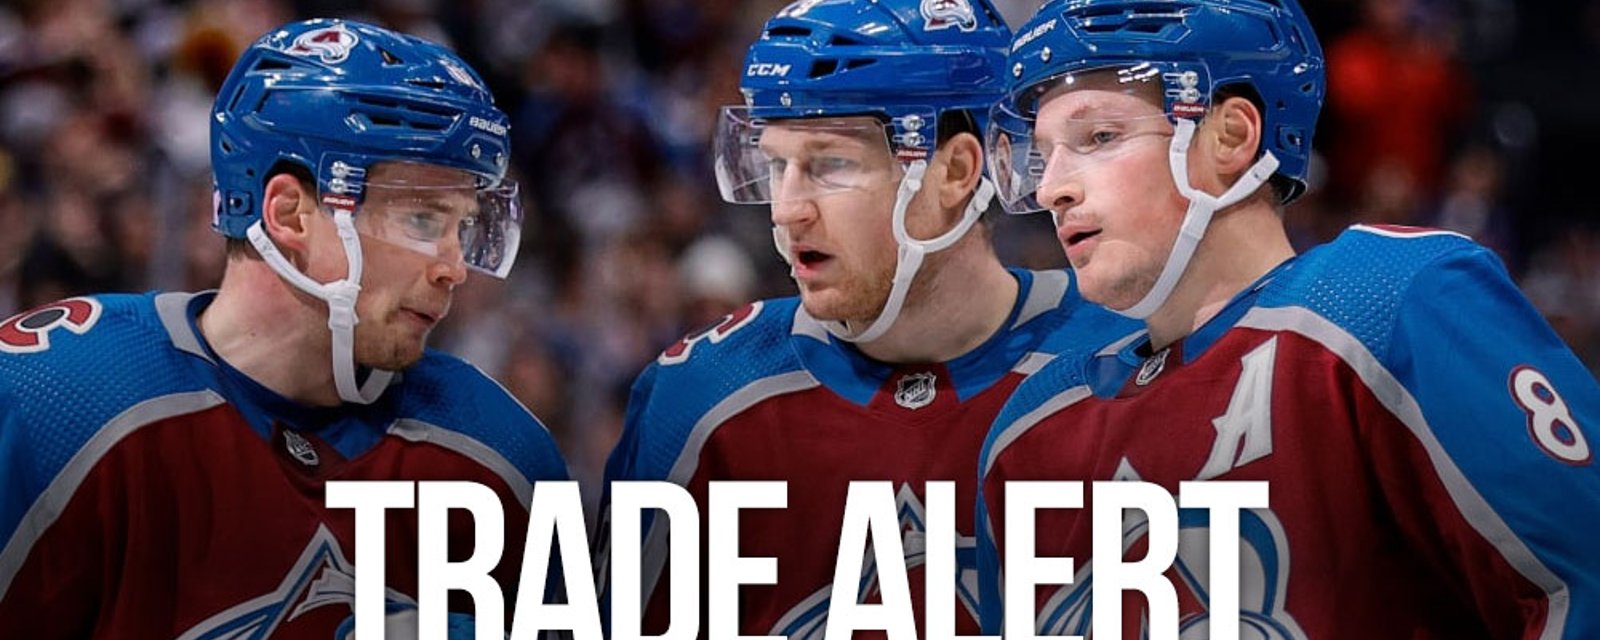 Avalanche acquire coveted forward ahead of NHL trade deadline